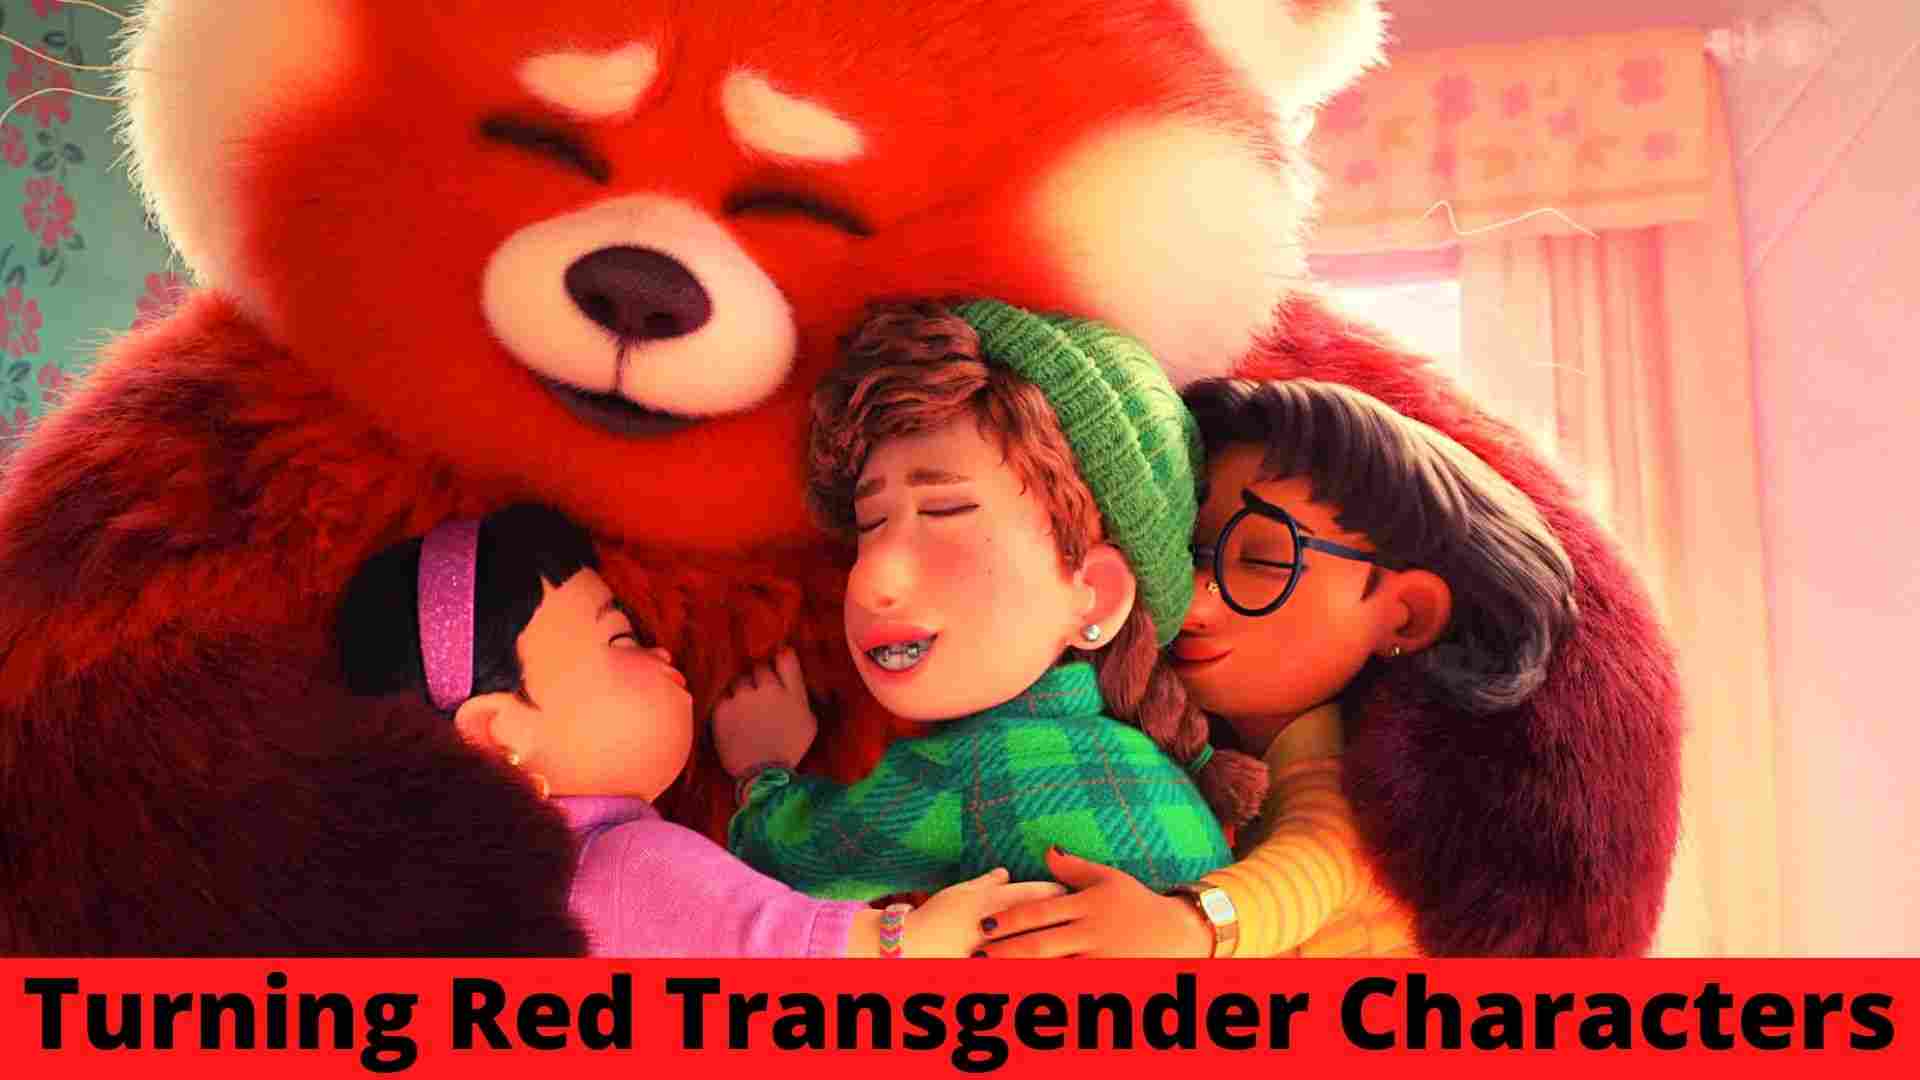 Turning Red Transgender Characters | 2022 Film Turning Red